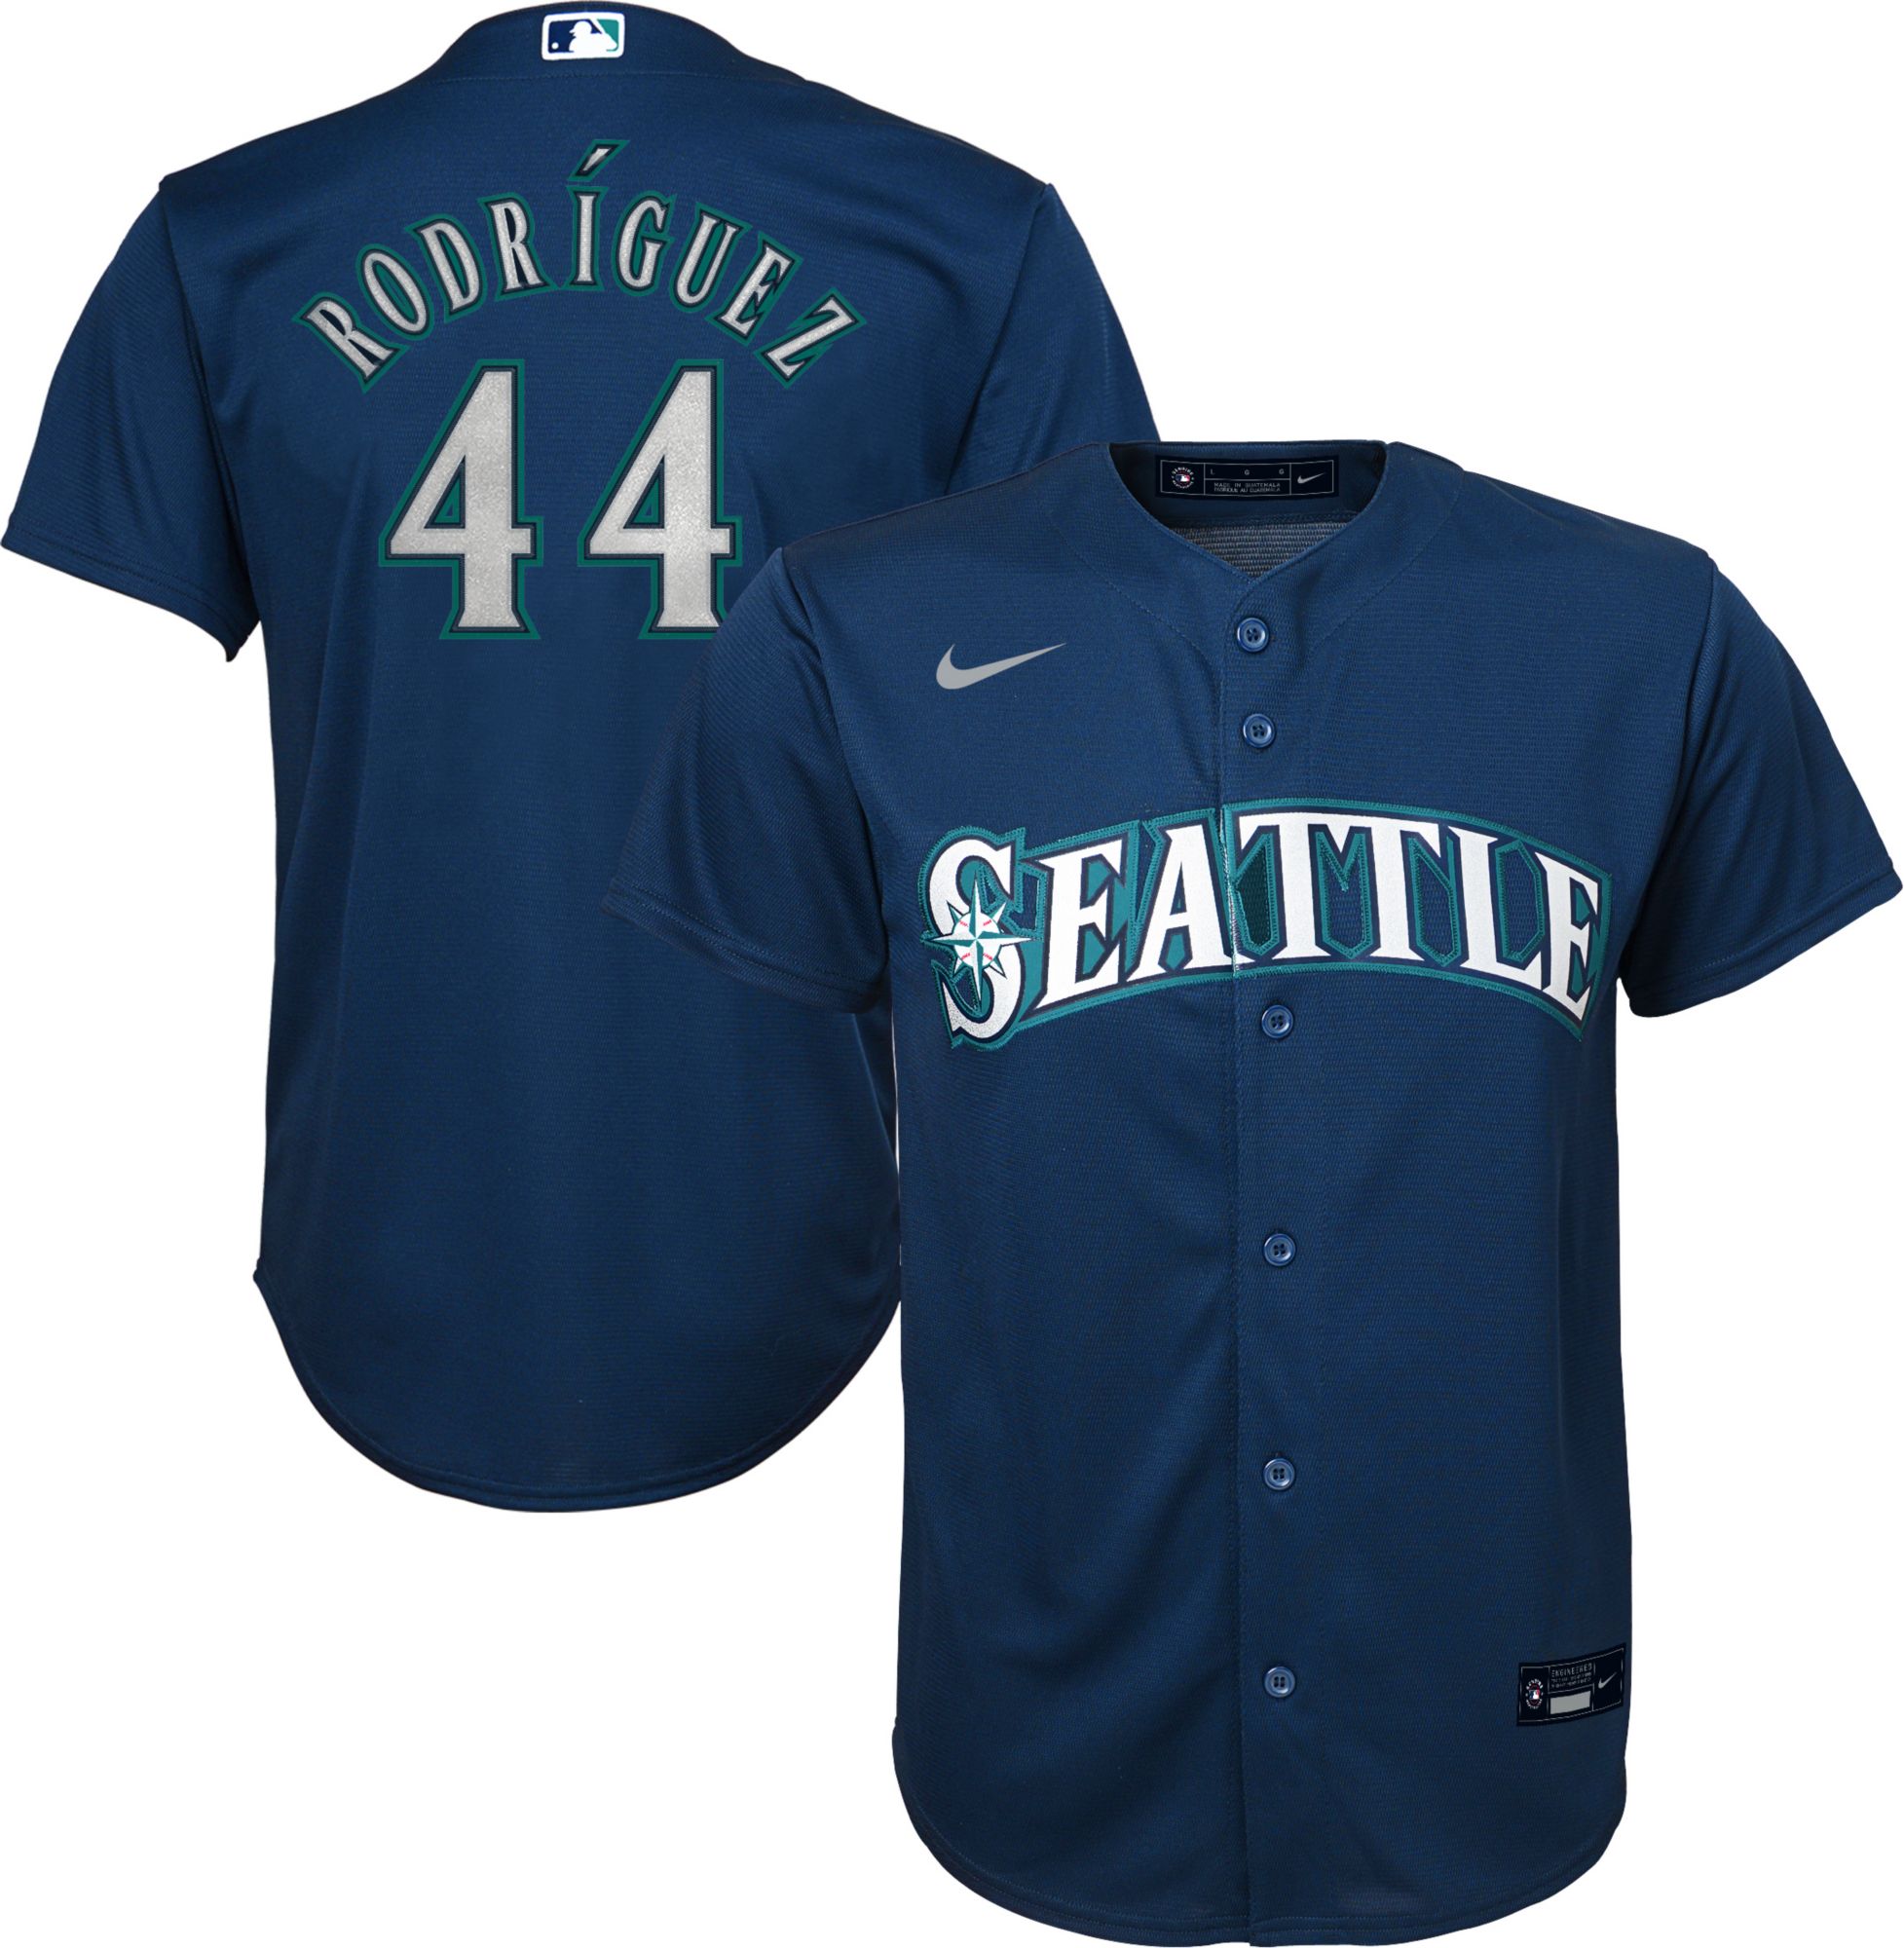 Mariners home jersey